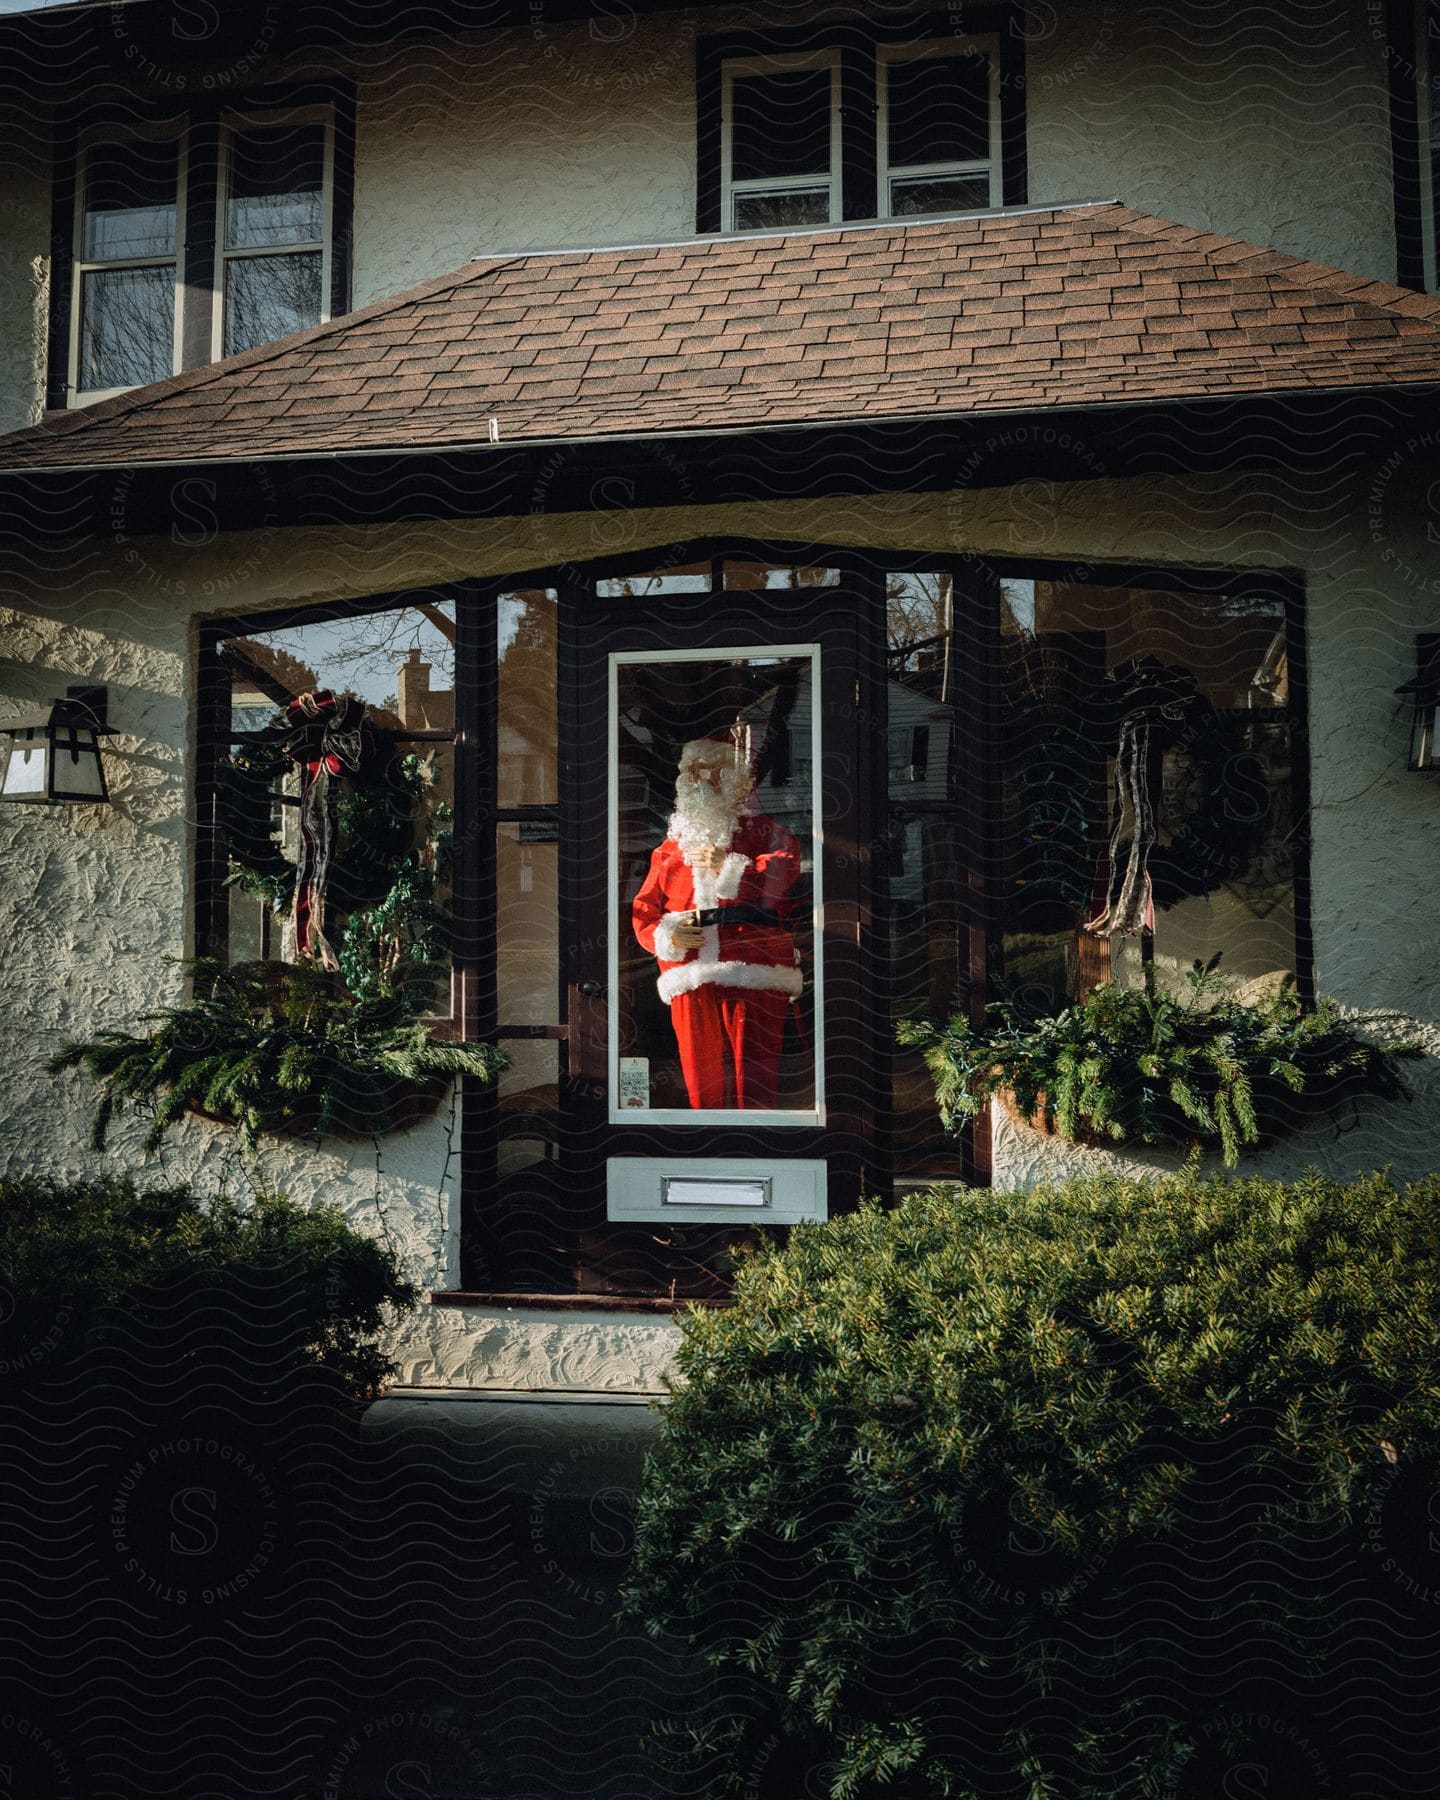 The front of a home decorated with a wreath and a full size santa claus decal on the front door